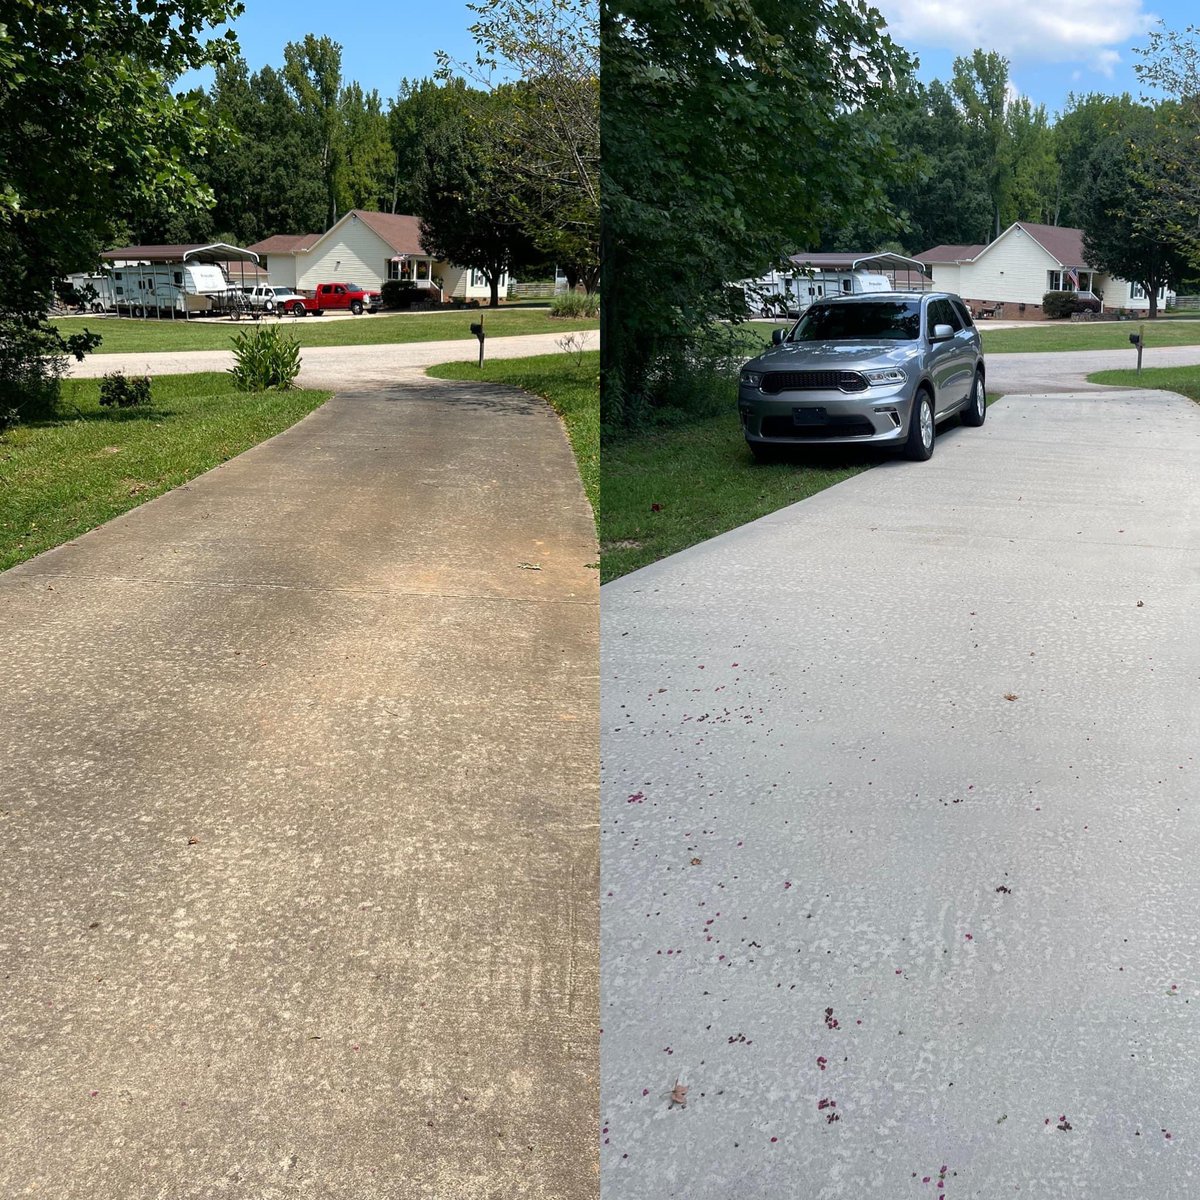 Revitalize your concrete with #PressureWashing! #ConcreteCleaning made easy. Clear debris, wear protective gear, choose the right equipment, use detergents, mind the technique, and rinse thoroughly. #CleanFreaks #SparklingSurfaces #EfficientCleaning #PressureWasherMagic